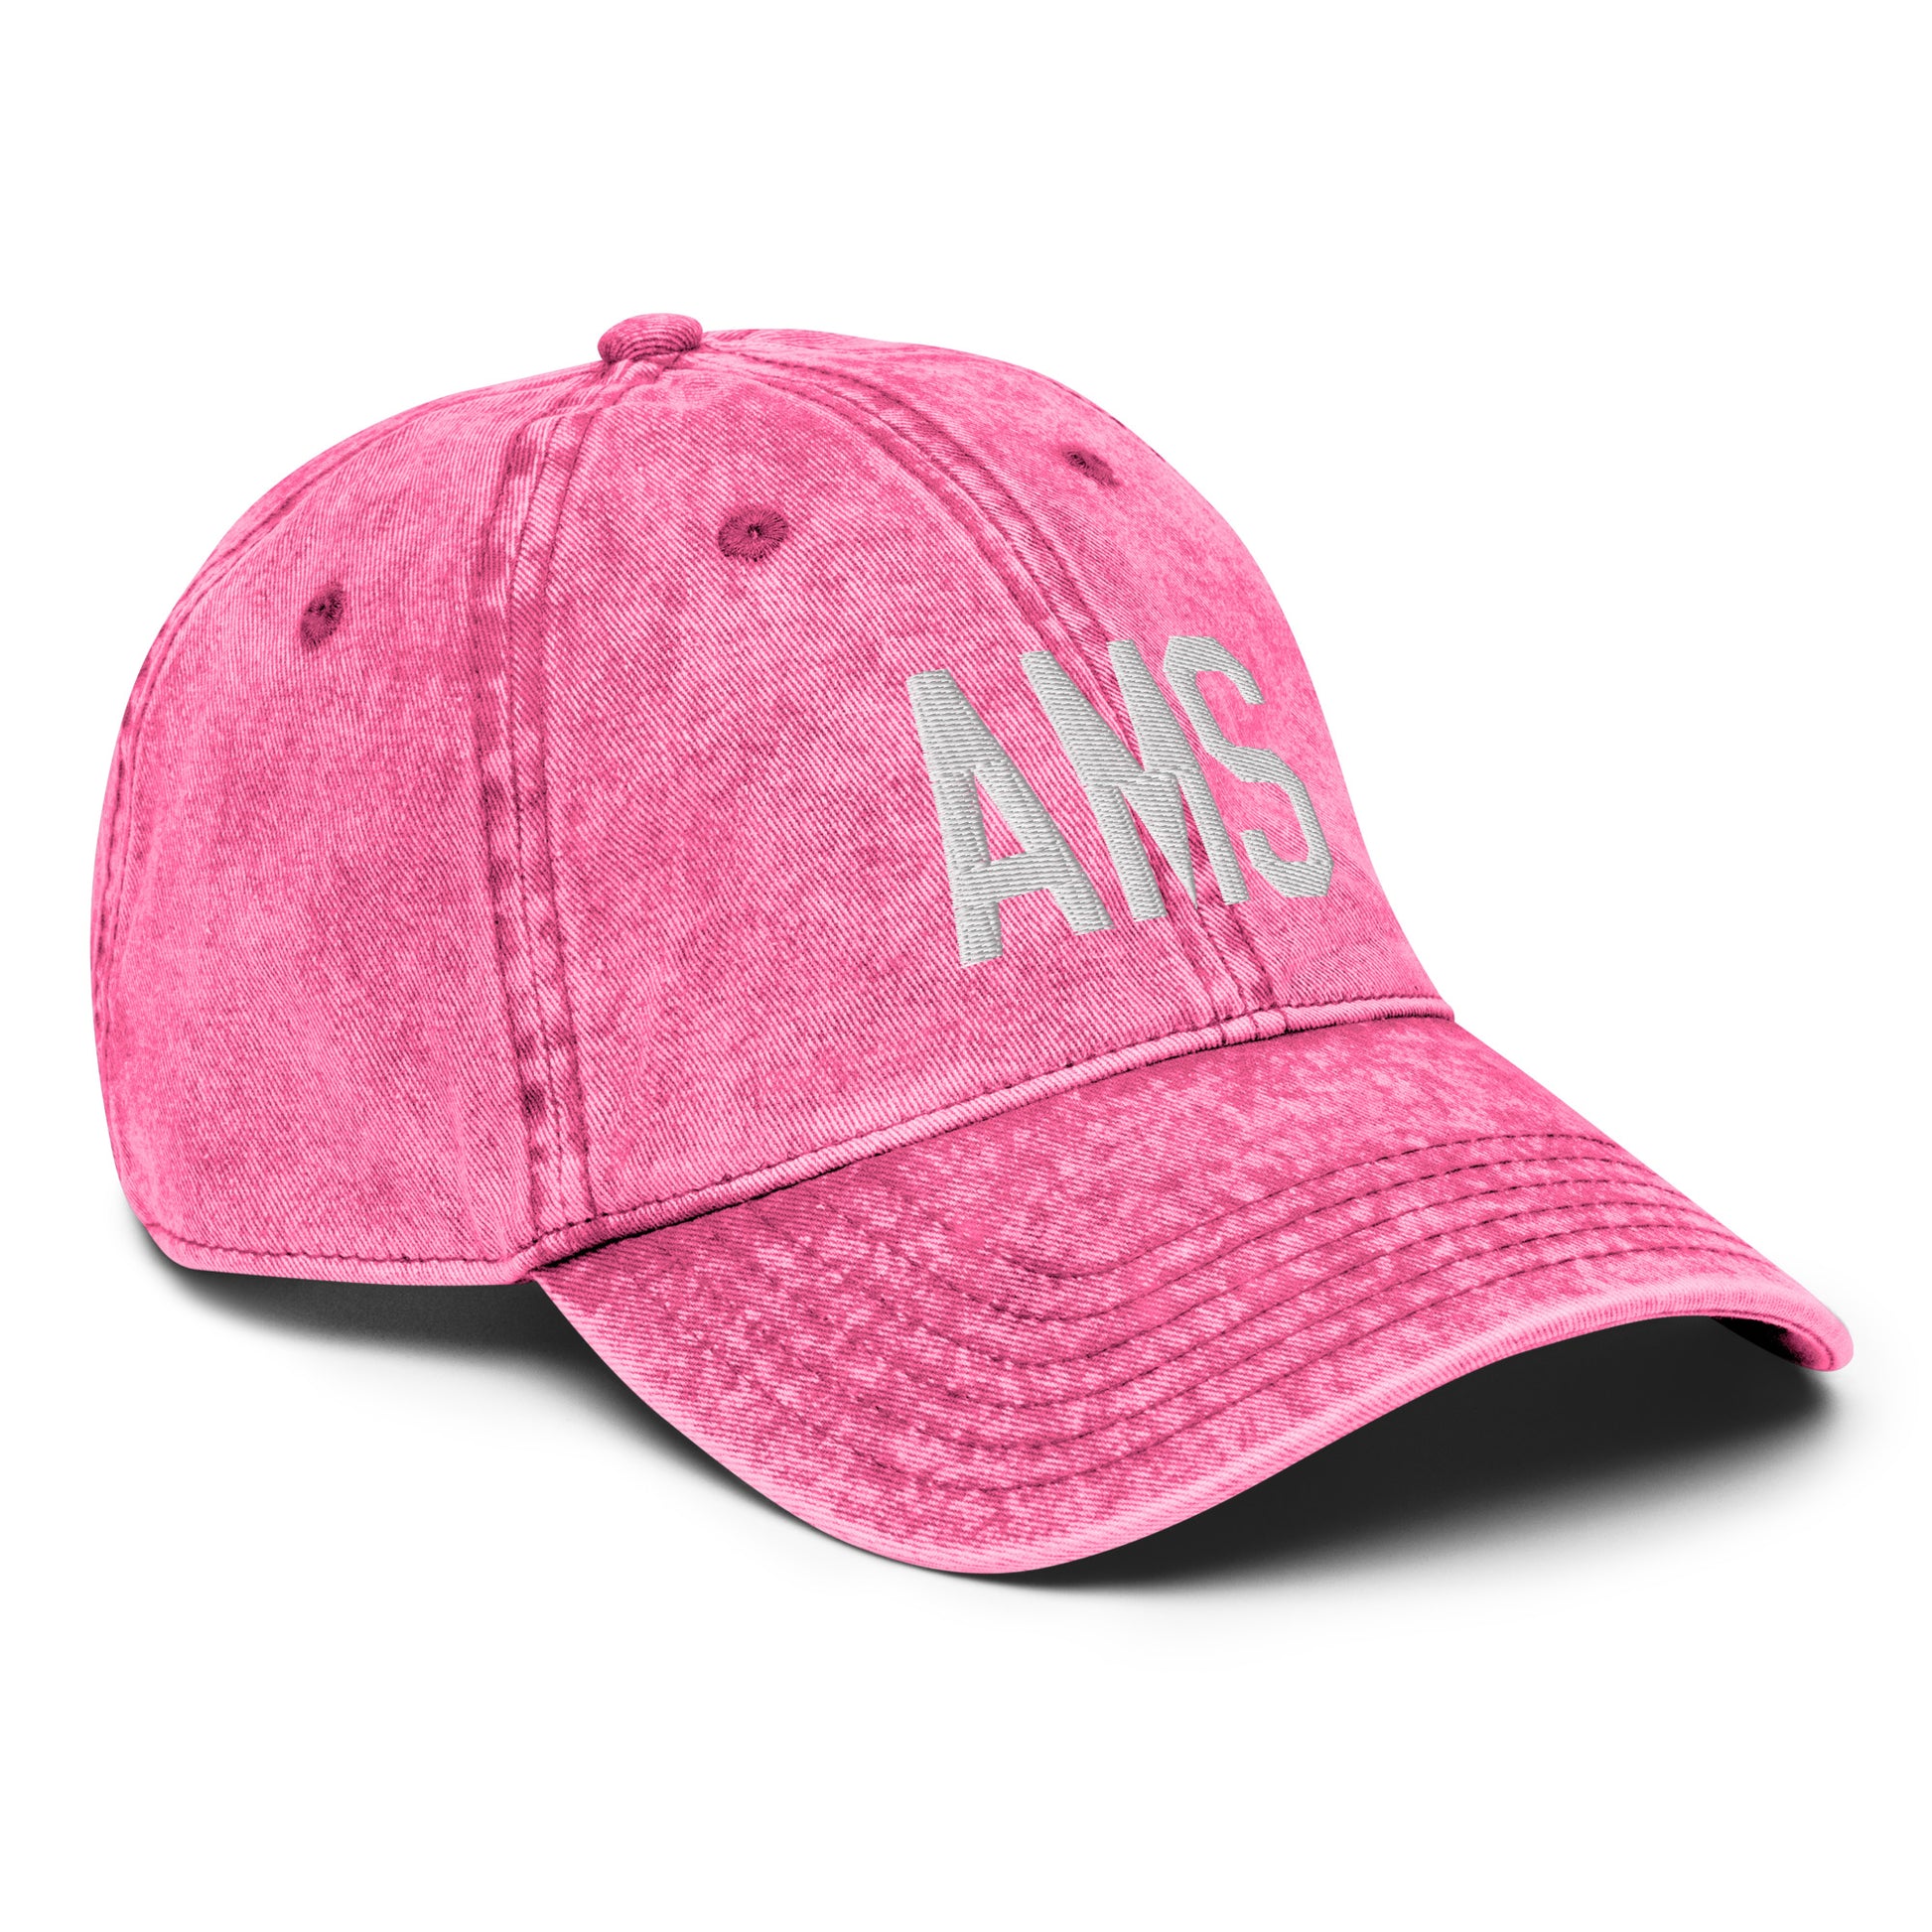 Airport Code Twill Cap - White • AMS Amsterdam • YHM Designs - Image 27